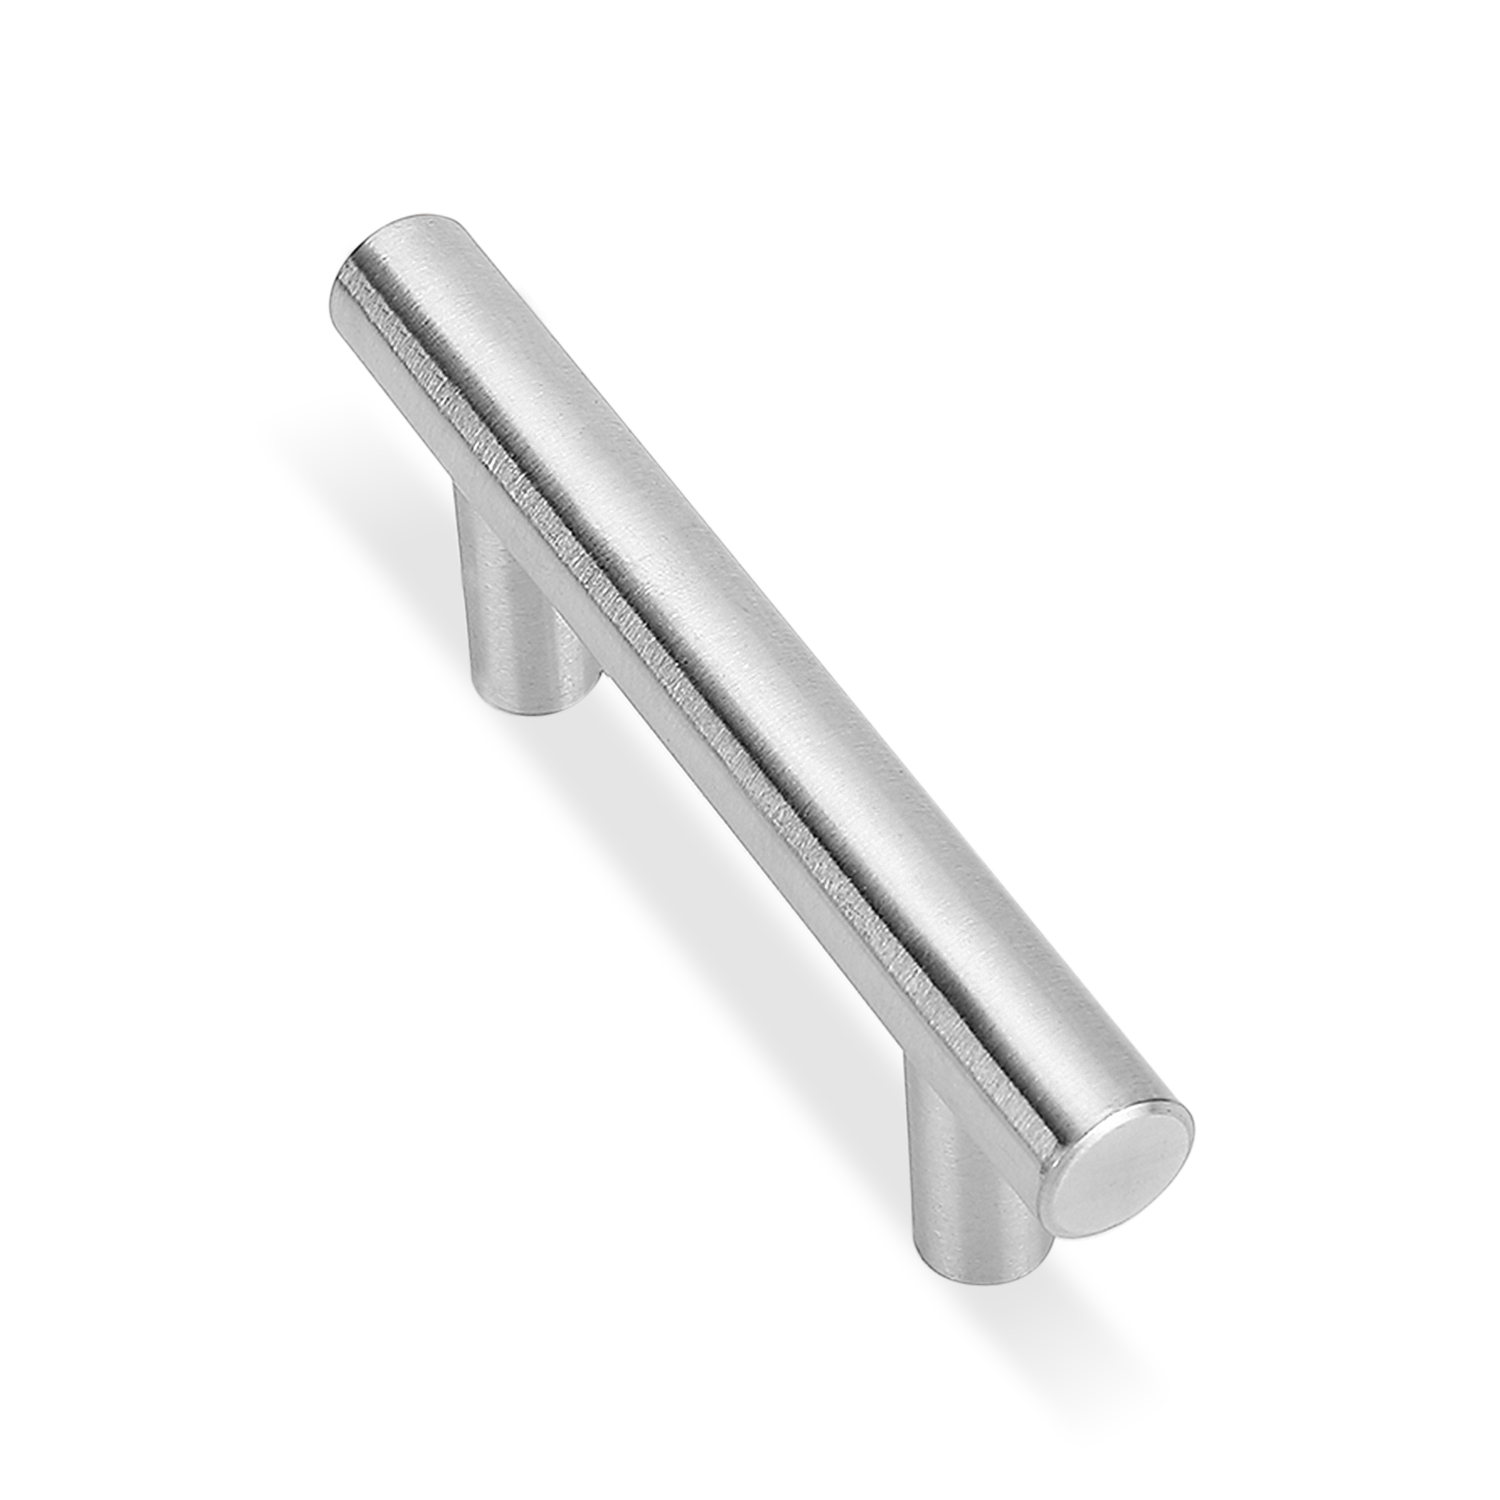 1 Pack Kitchen Cabinet Handles Silver Drawer Pulls 4 inch, 2.5 inch Hole Center, Solid Stainless Steel T Bar with Satin Brushed Nickel, Hardware for Kitchen Cupboard Door Bathroom Furniture - image 2 of 7